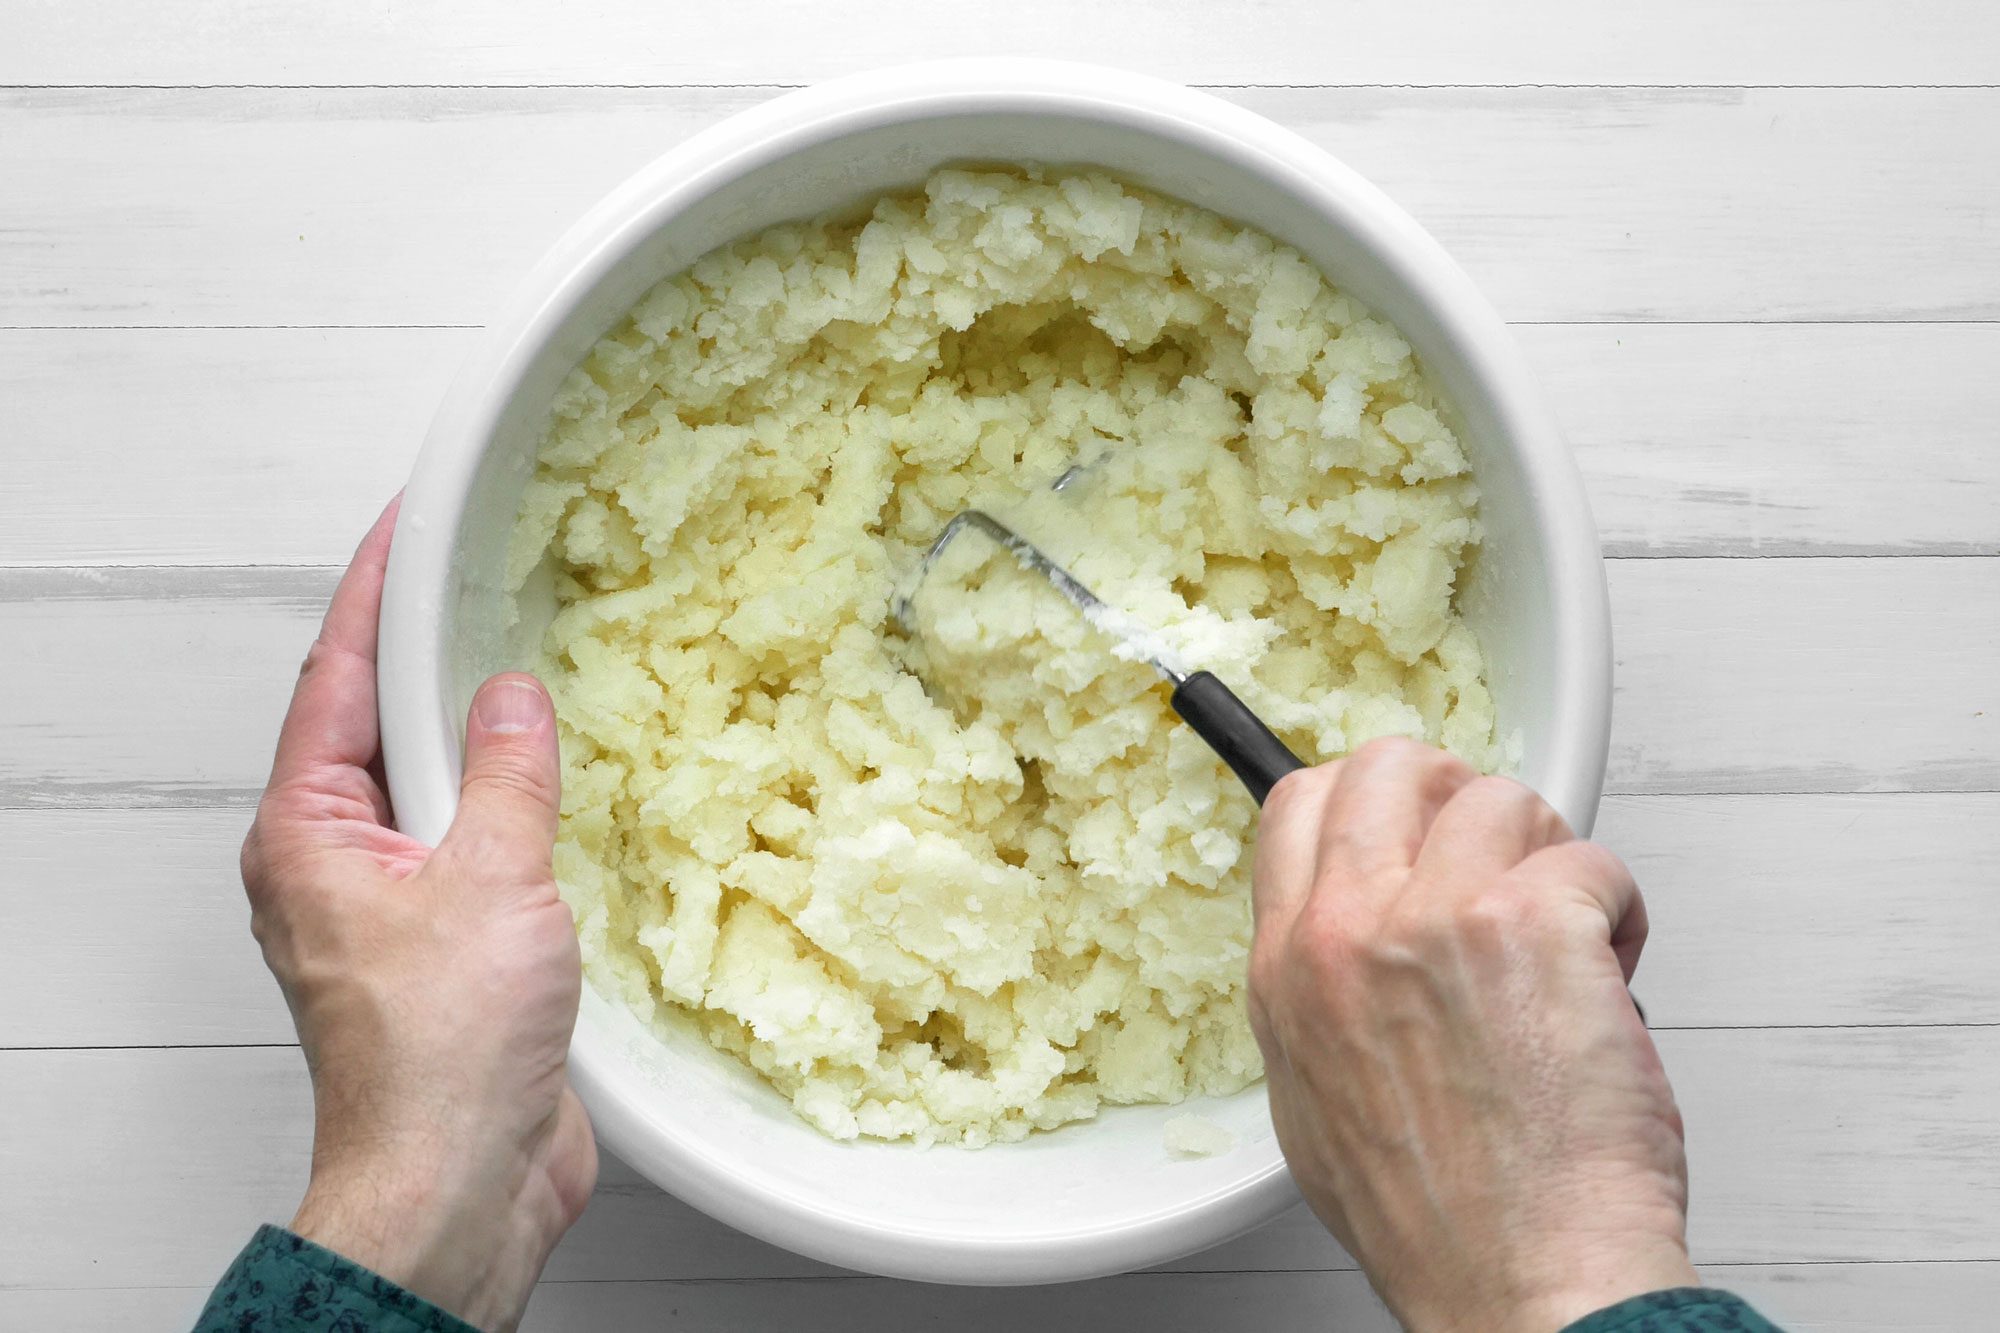 Mash the potatoes in a large bowl